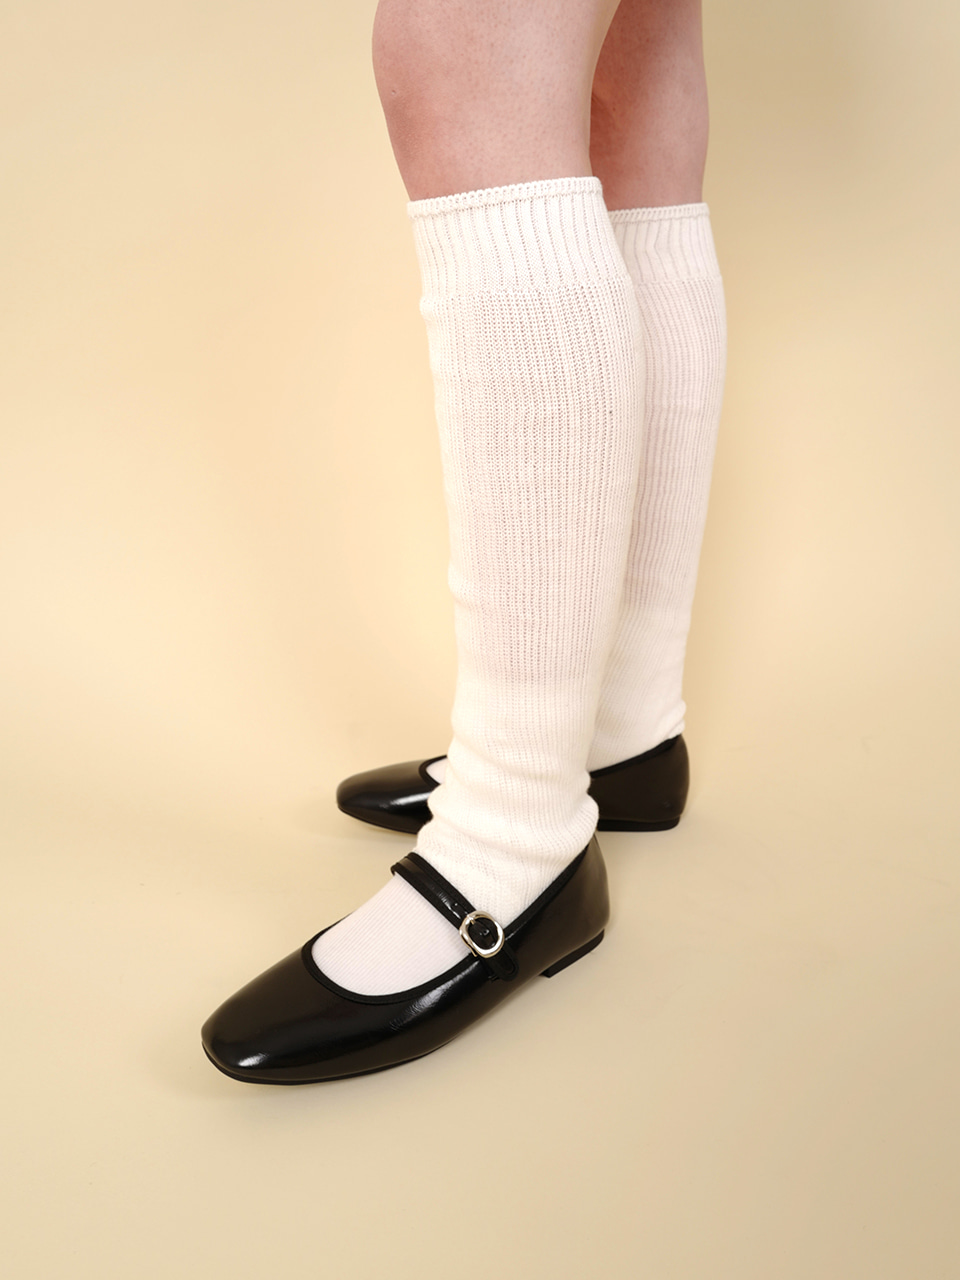 [buying] ann strap shoes